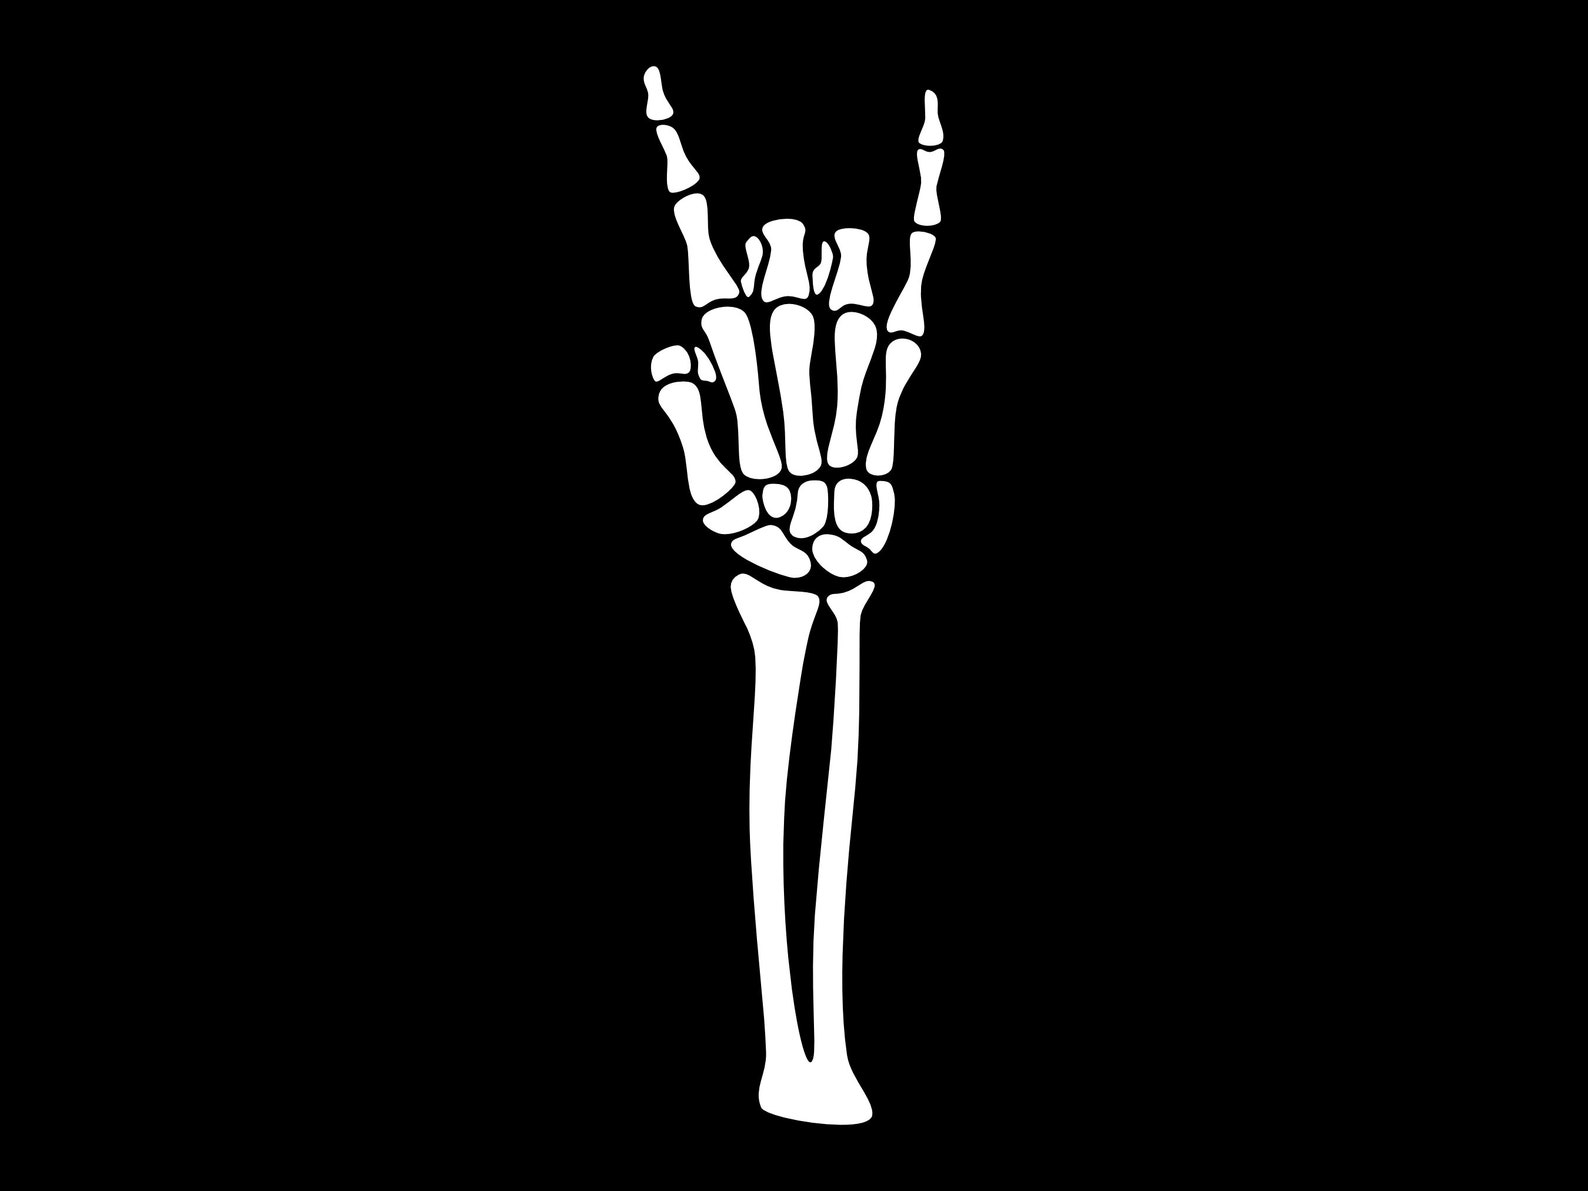 Skeleton Hand Rocker SVG Rock and Roll Hand Silhouette Hand - Etsy